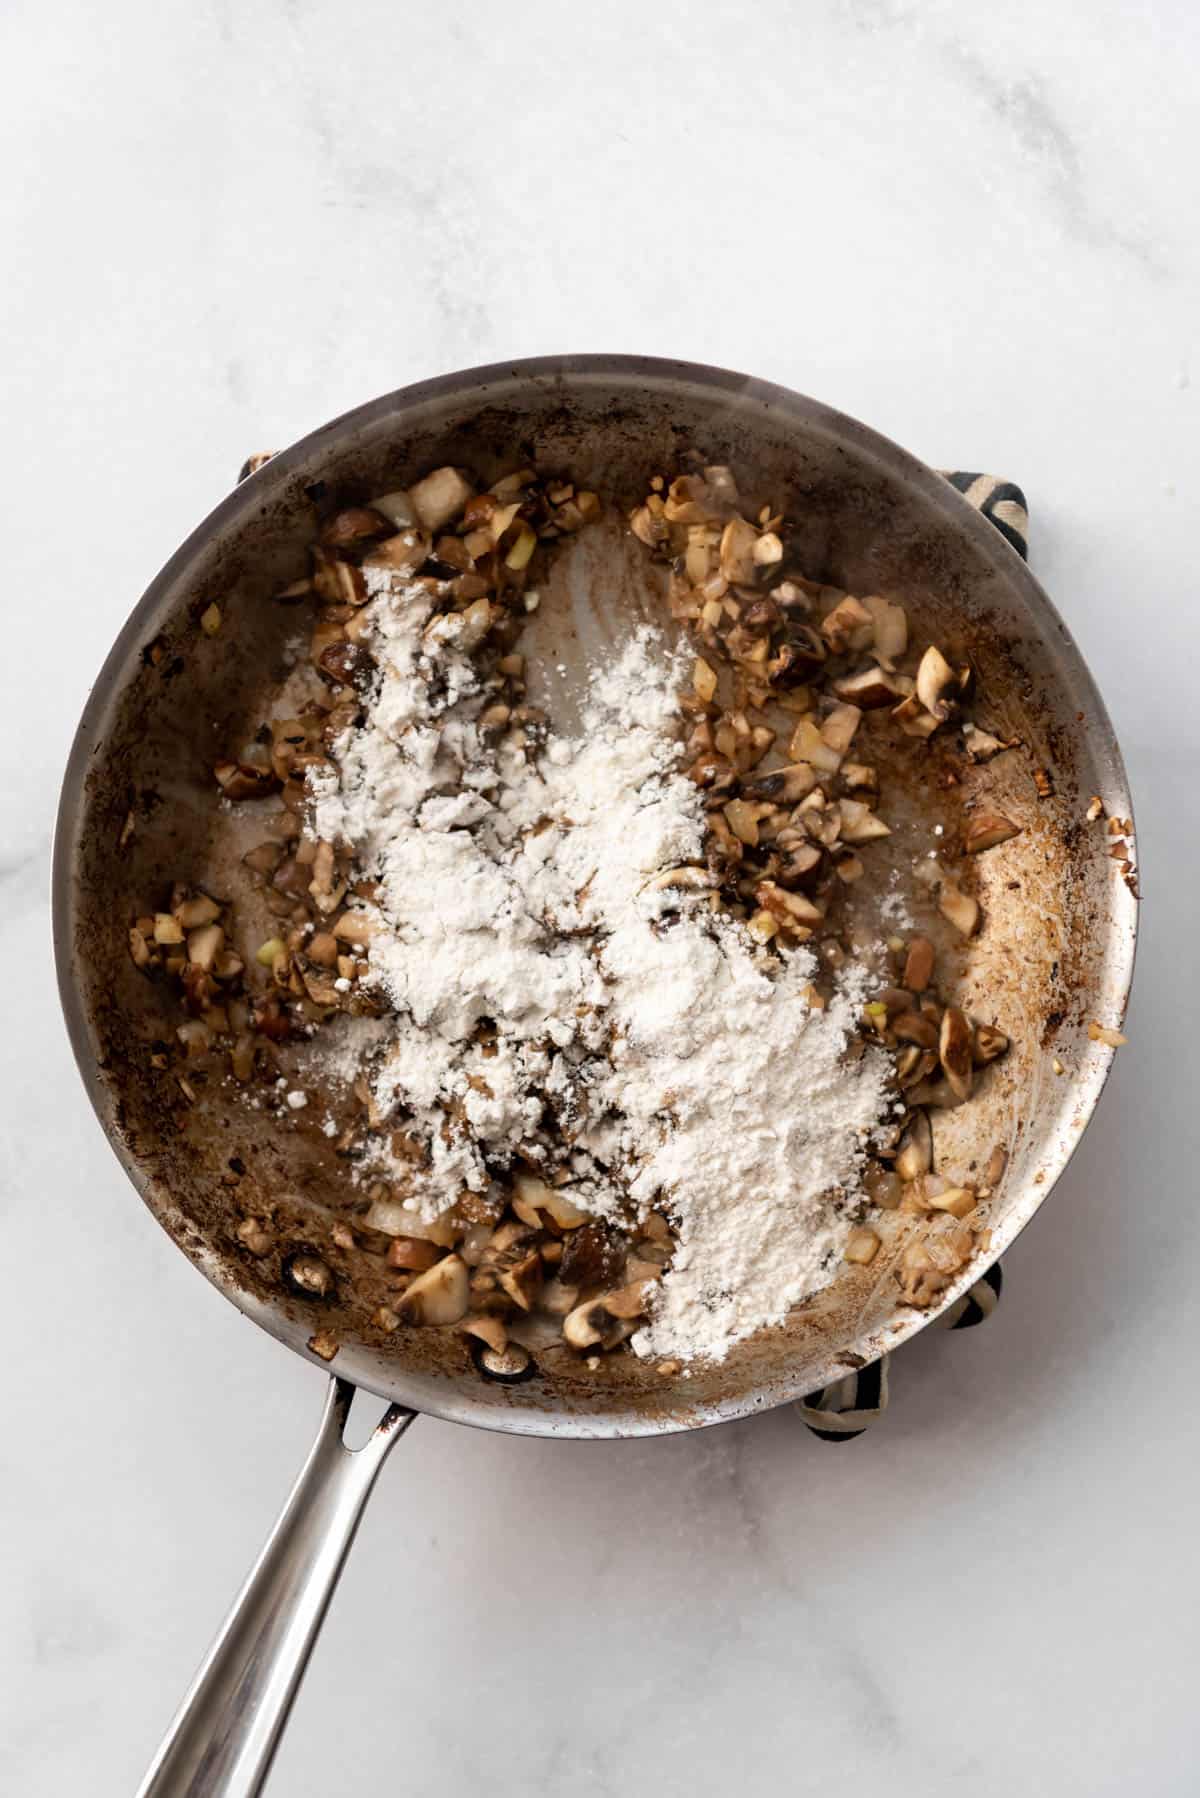 Flour sprinkled over sauteed mushrooms in a pan.